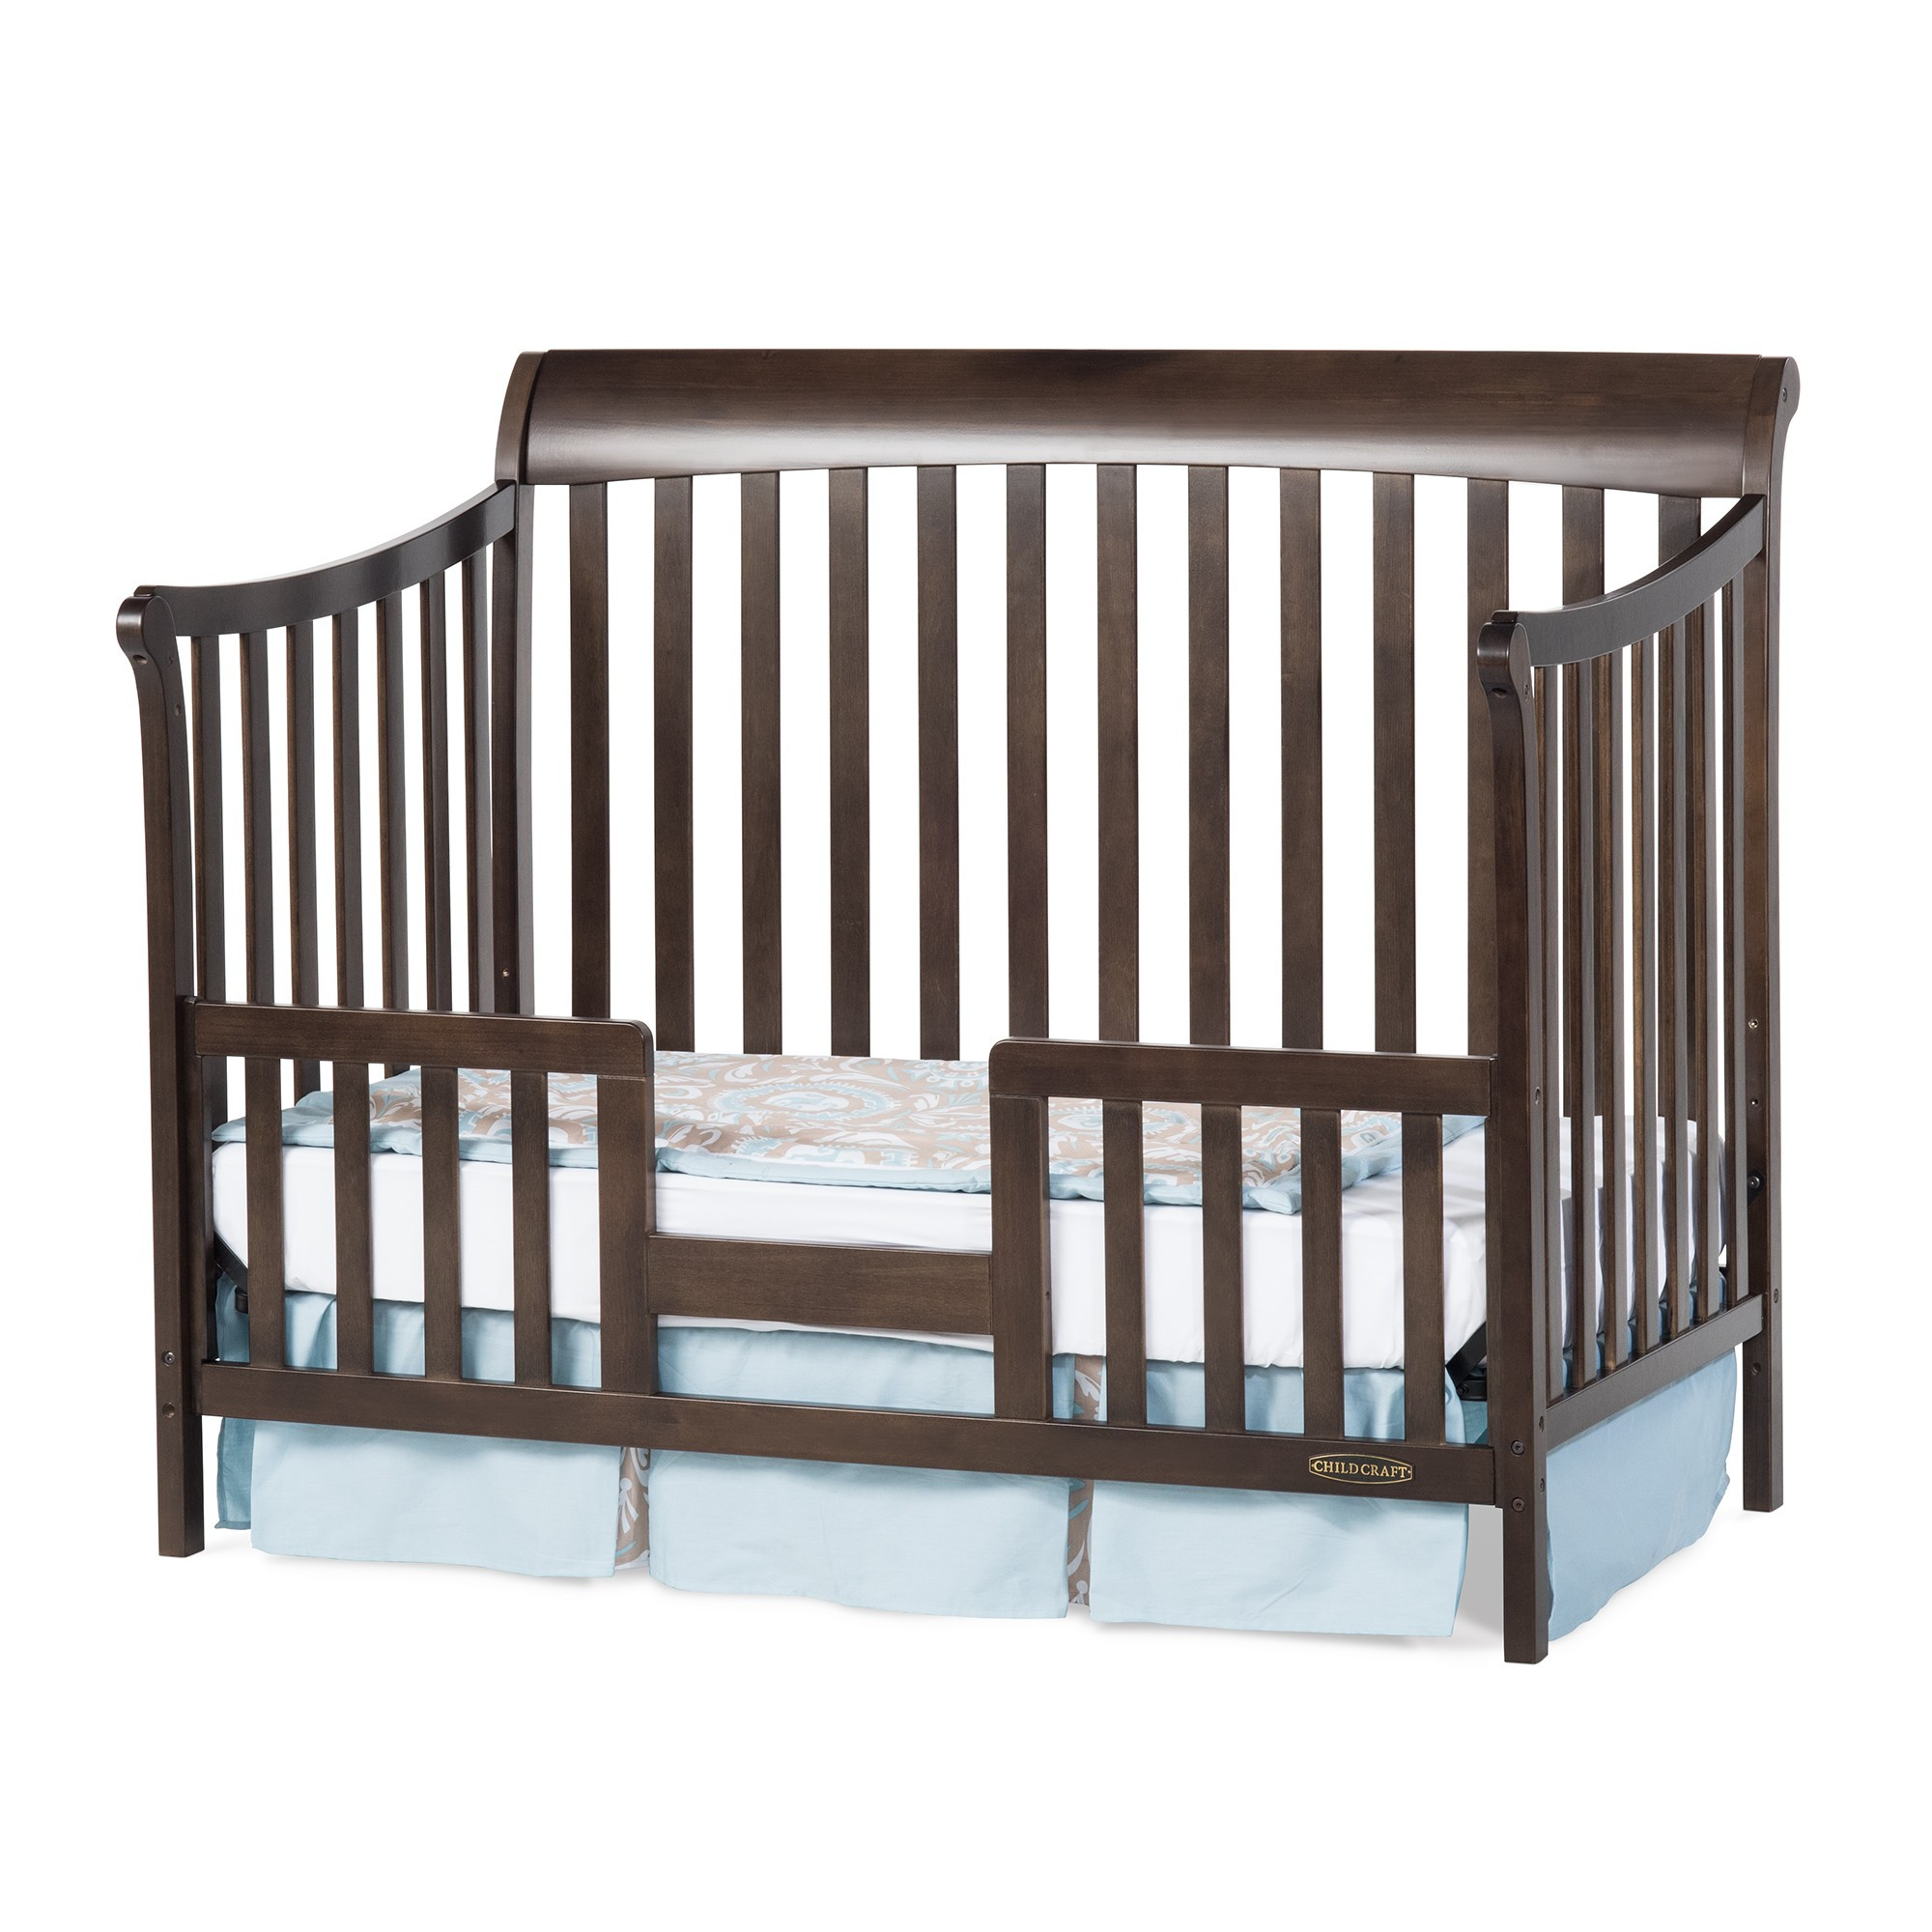 Child Craft Coventry Crib
 Coventry 4 in 1 Convertible Crib